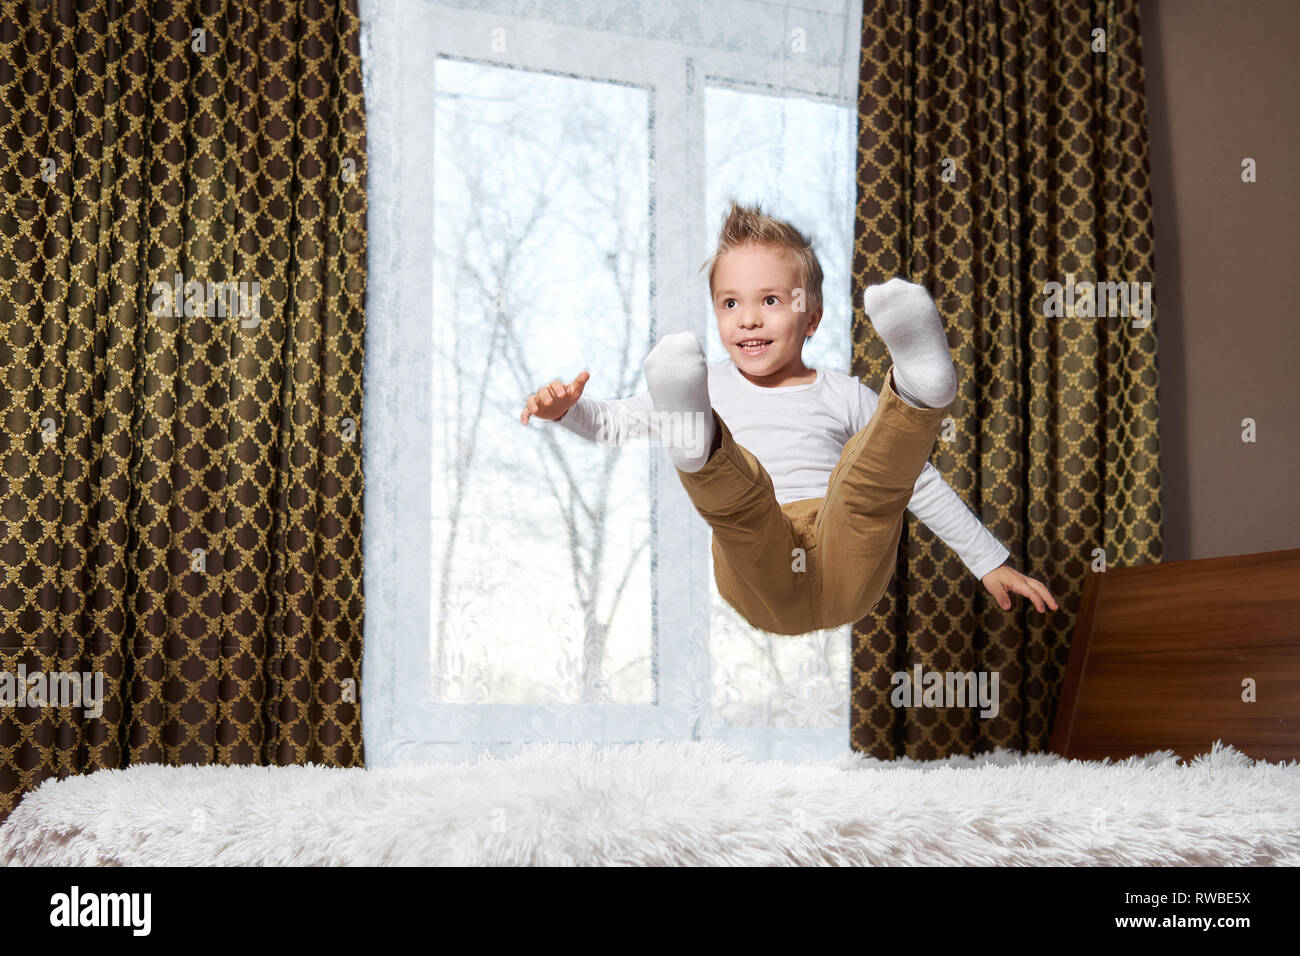 child fun home. Cheerful boy in motion jumping laughing on bed. Little kid of 6 years old happily plays morning in room. Stock Photo